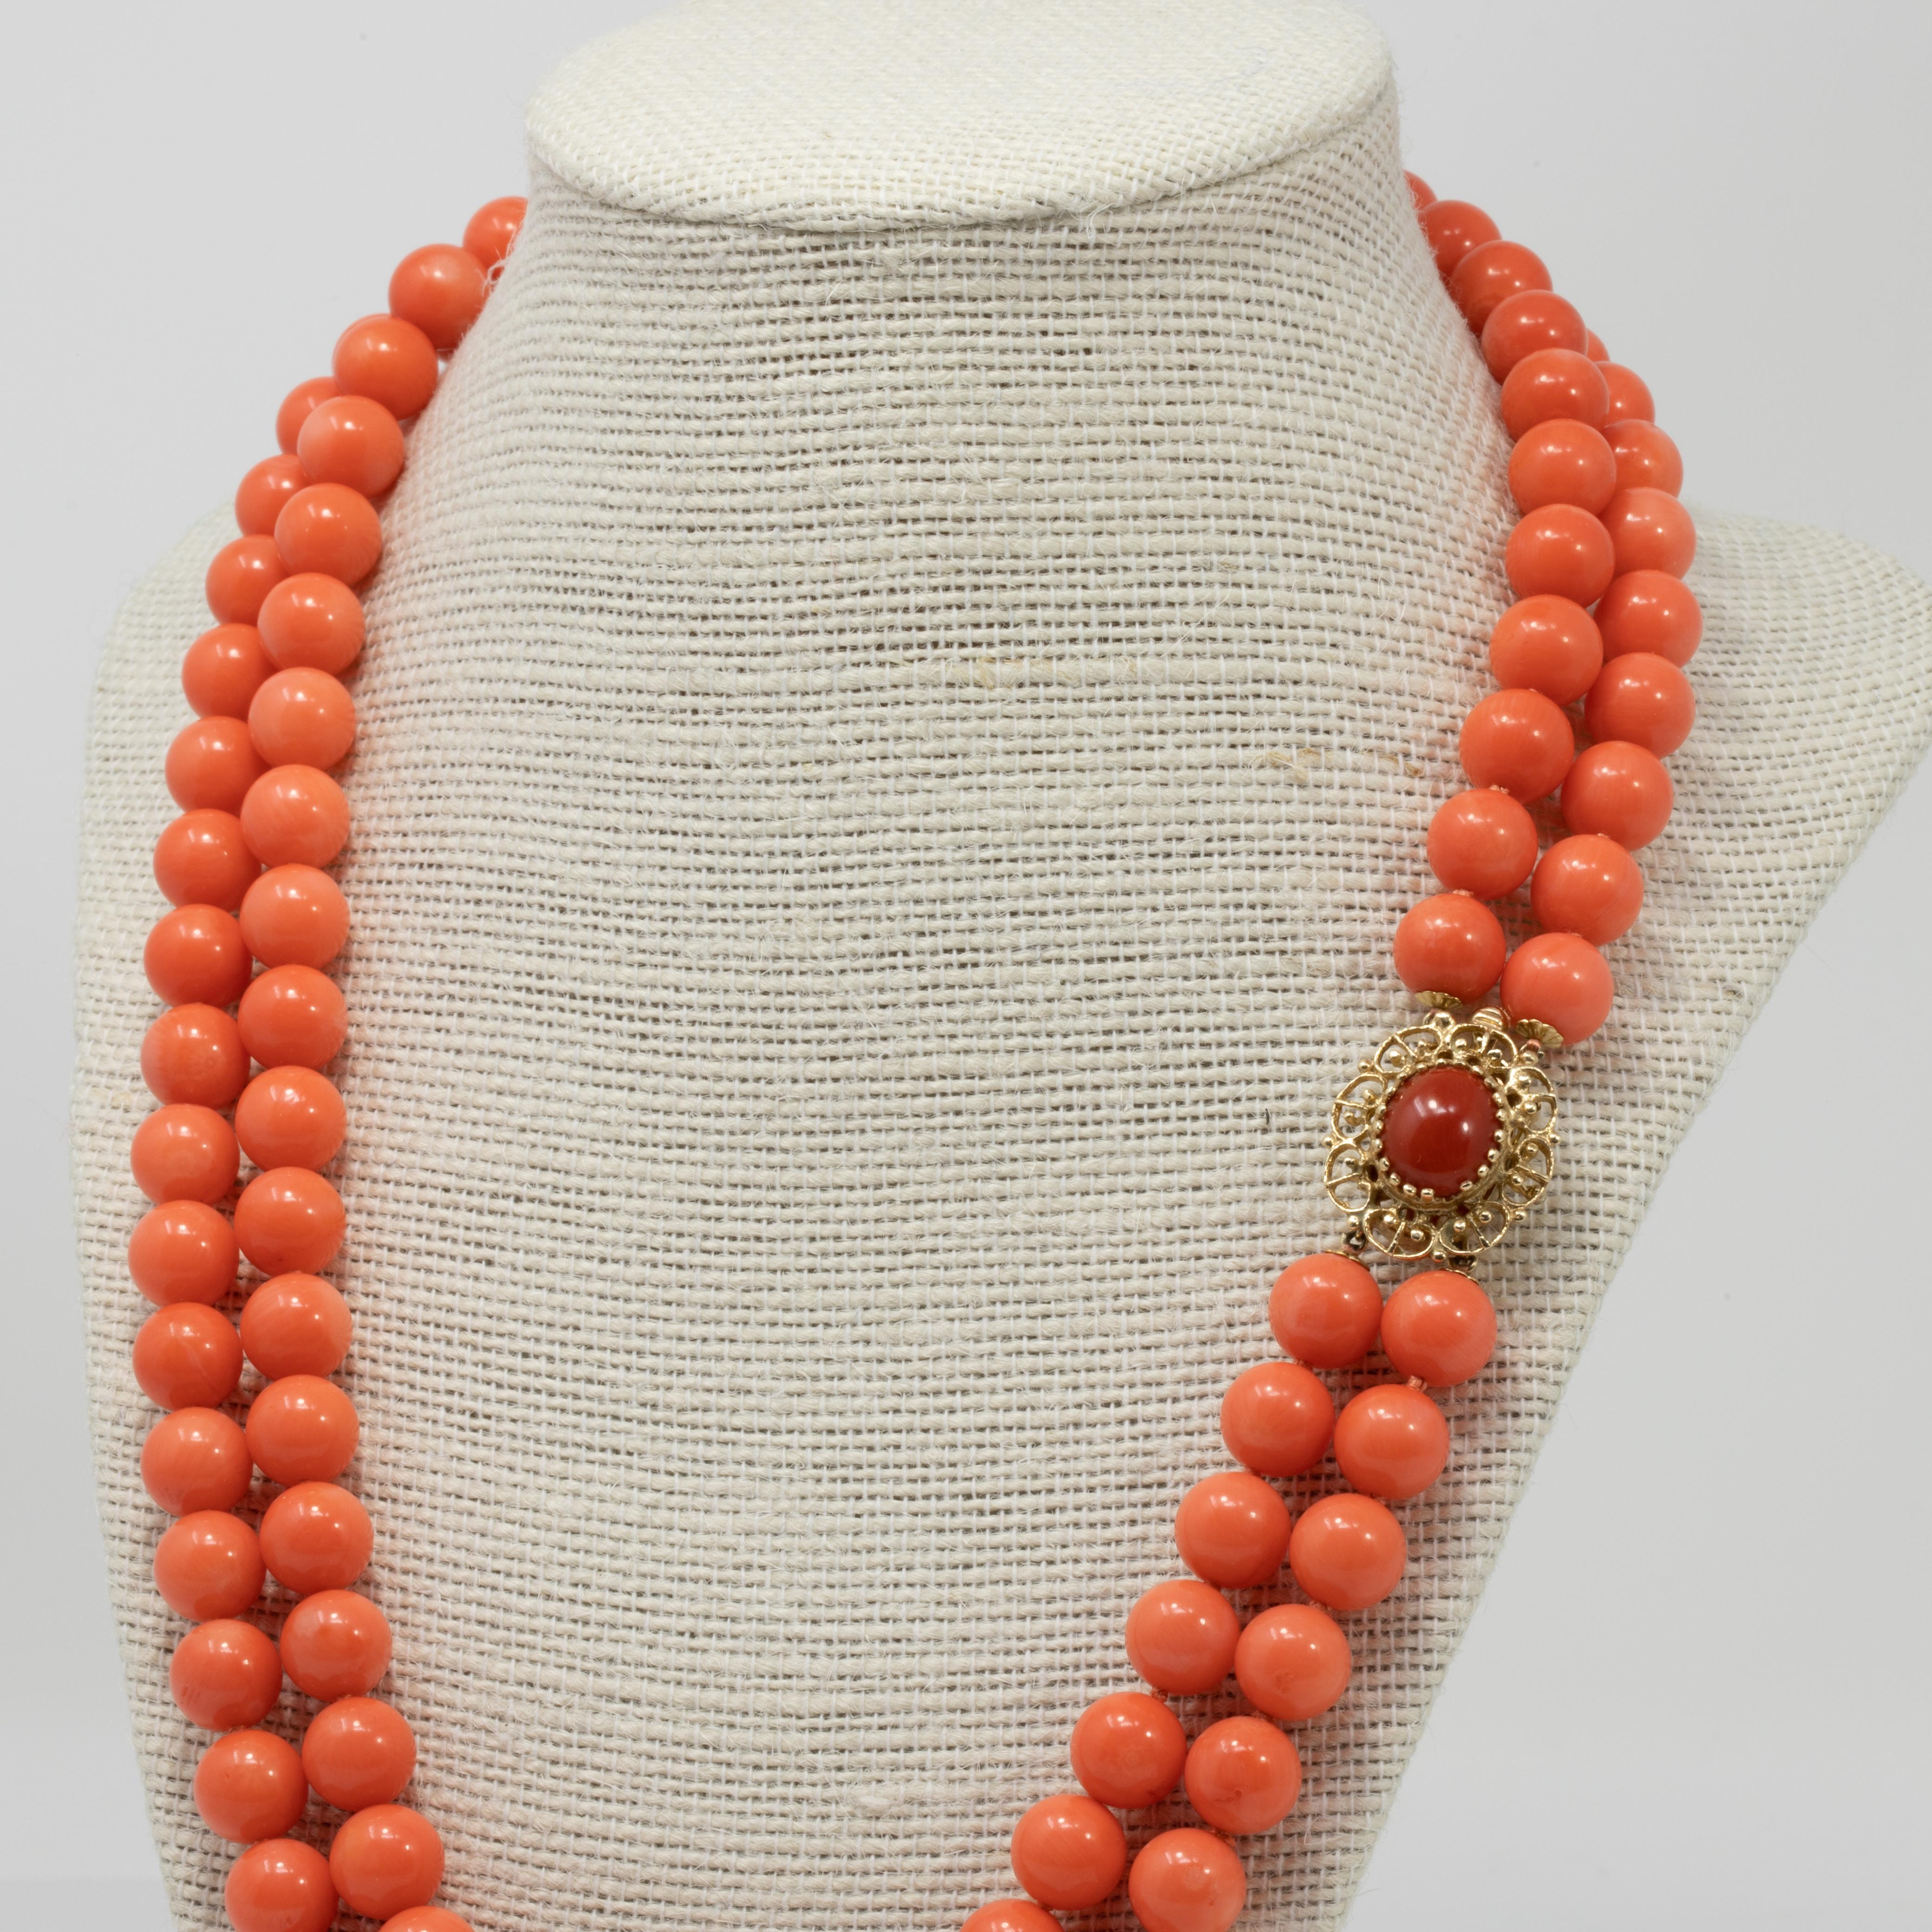 An elegant vintage salmon coral bead necklace. Features two strands of coral beads, fastened with a luxurious 14K yellow gold clasp, with a coral cabochon prong-set in the center.

Coral beads are 9.75mm in diameter.

A single small prong on the